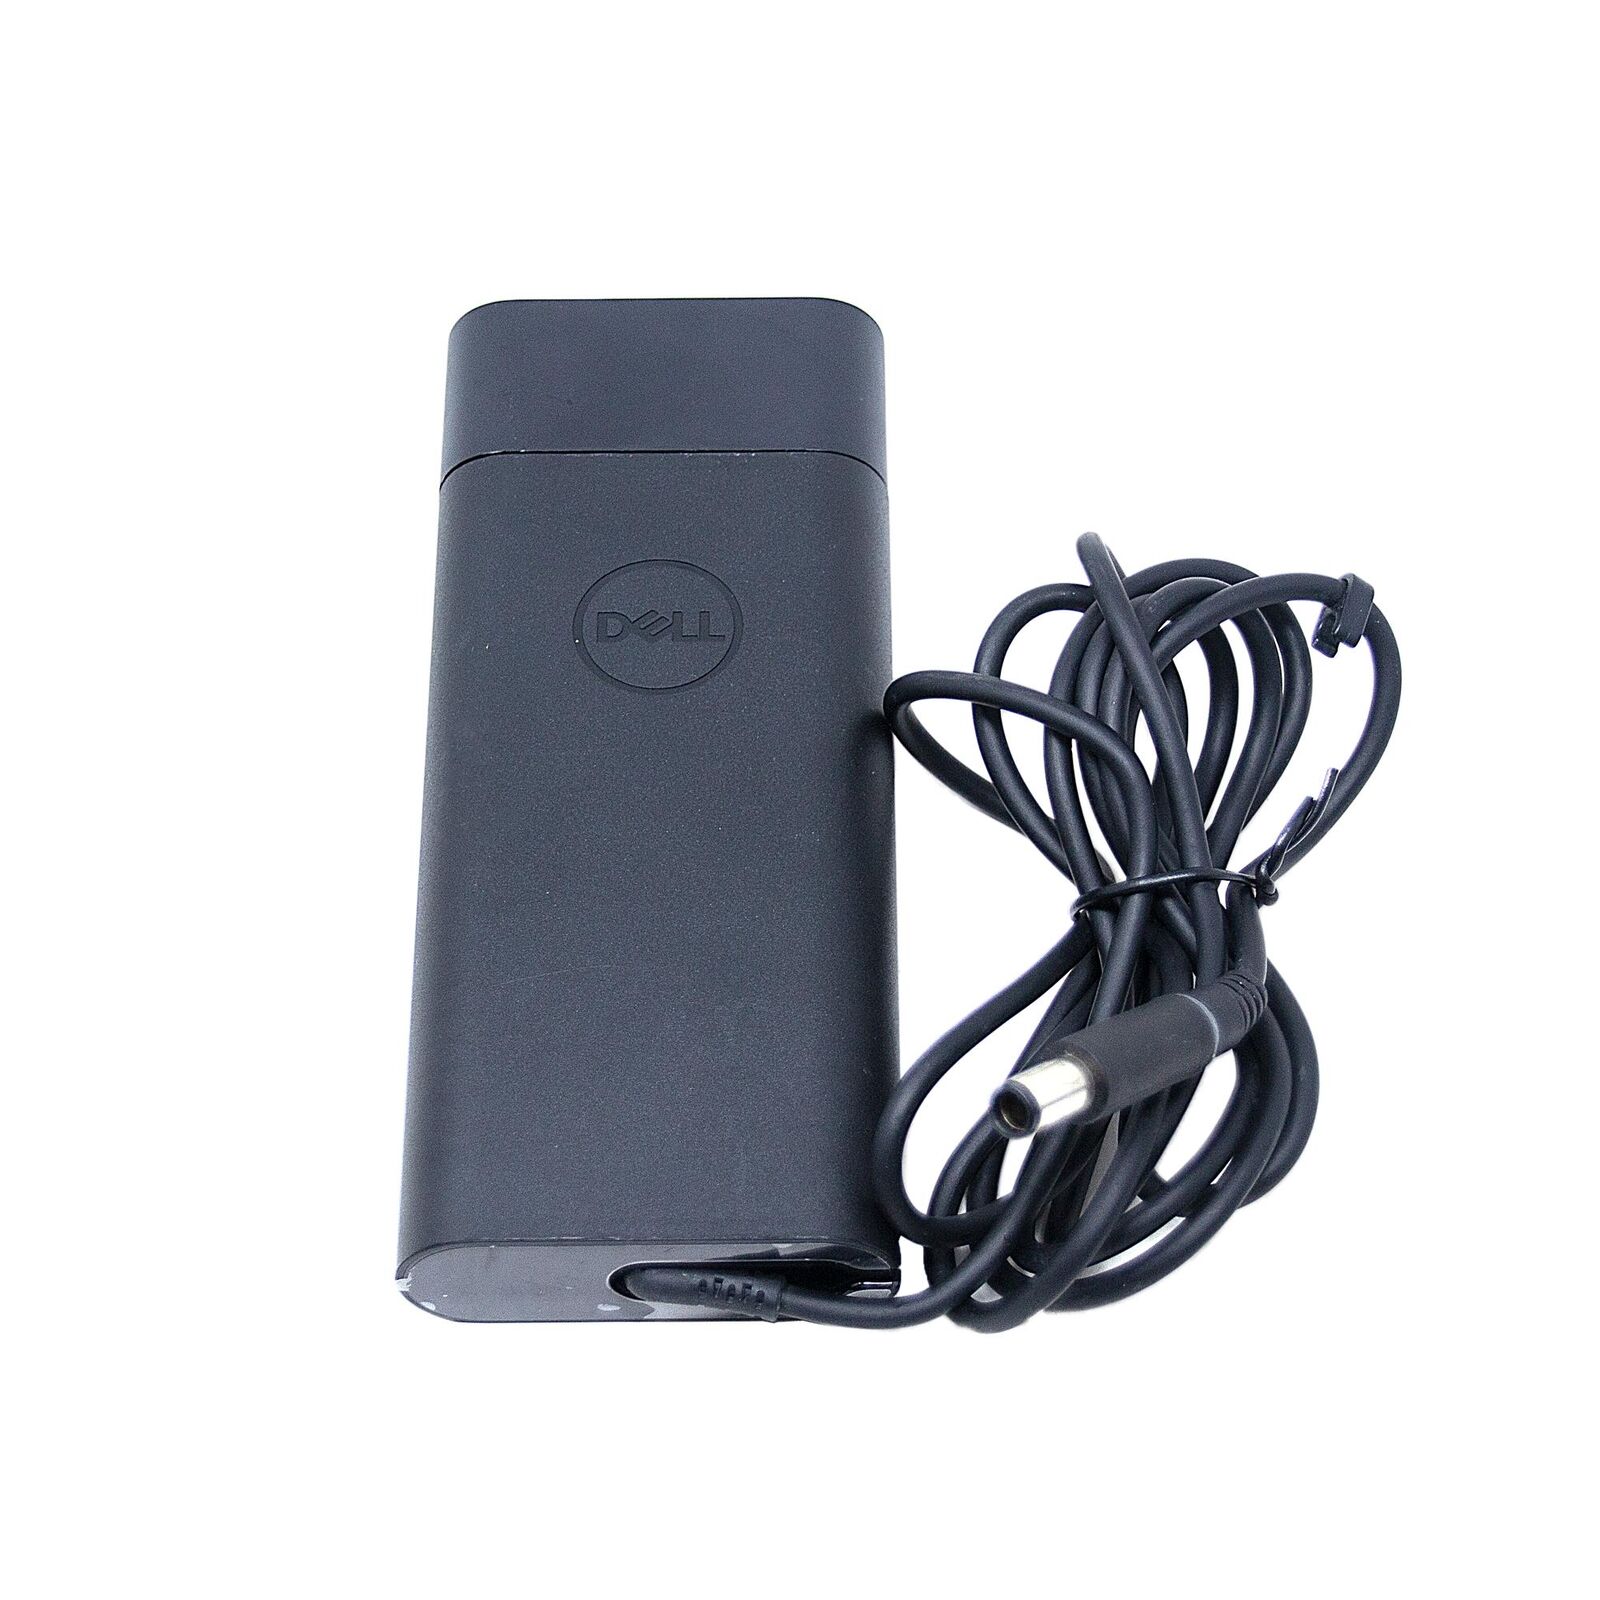 DELL 1XMKR 19.5V 4.62A 90W Genuine Original AC Power Adapter Charger